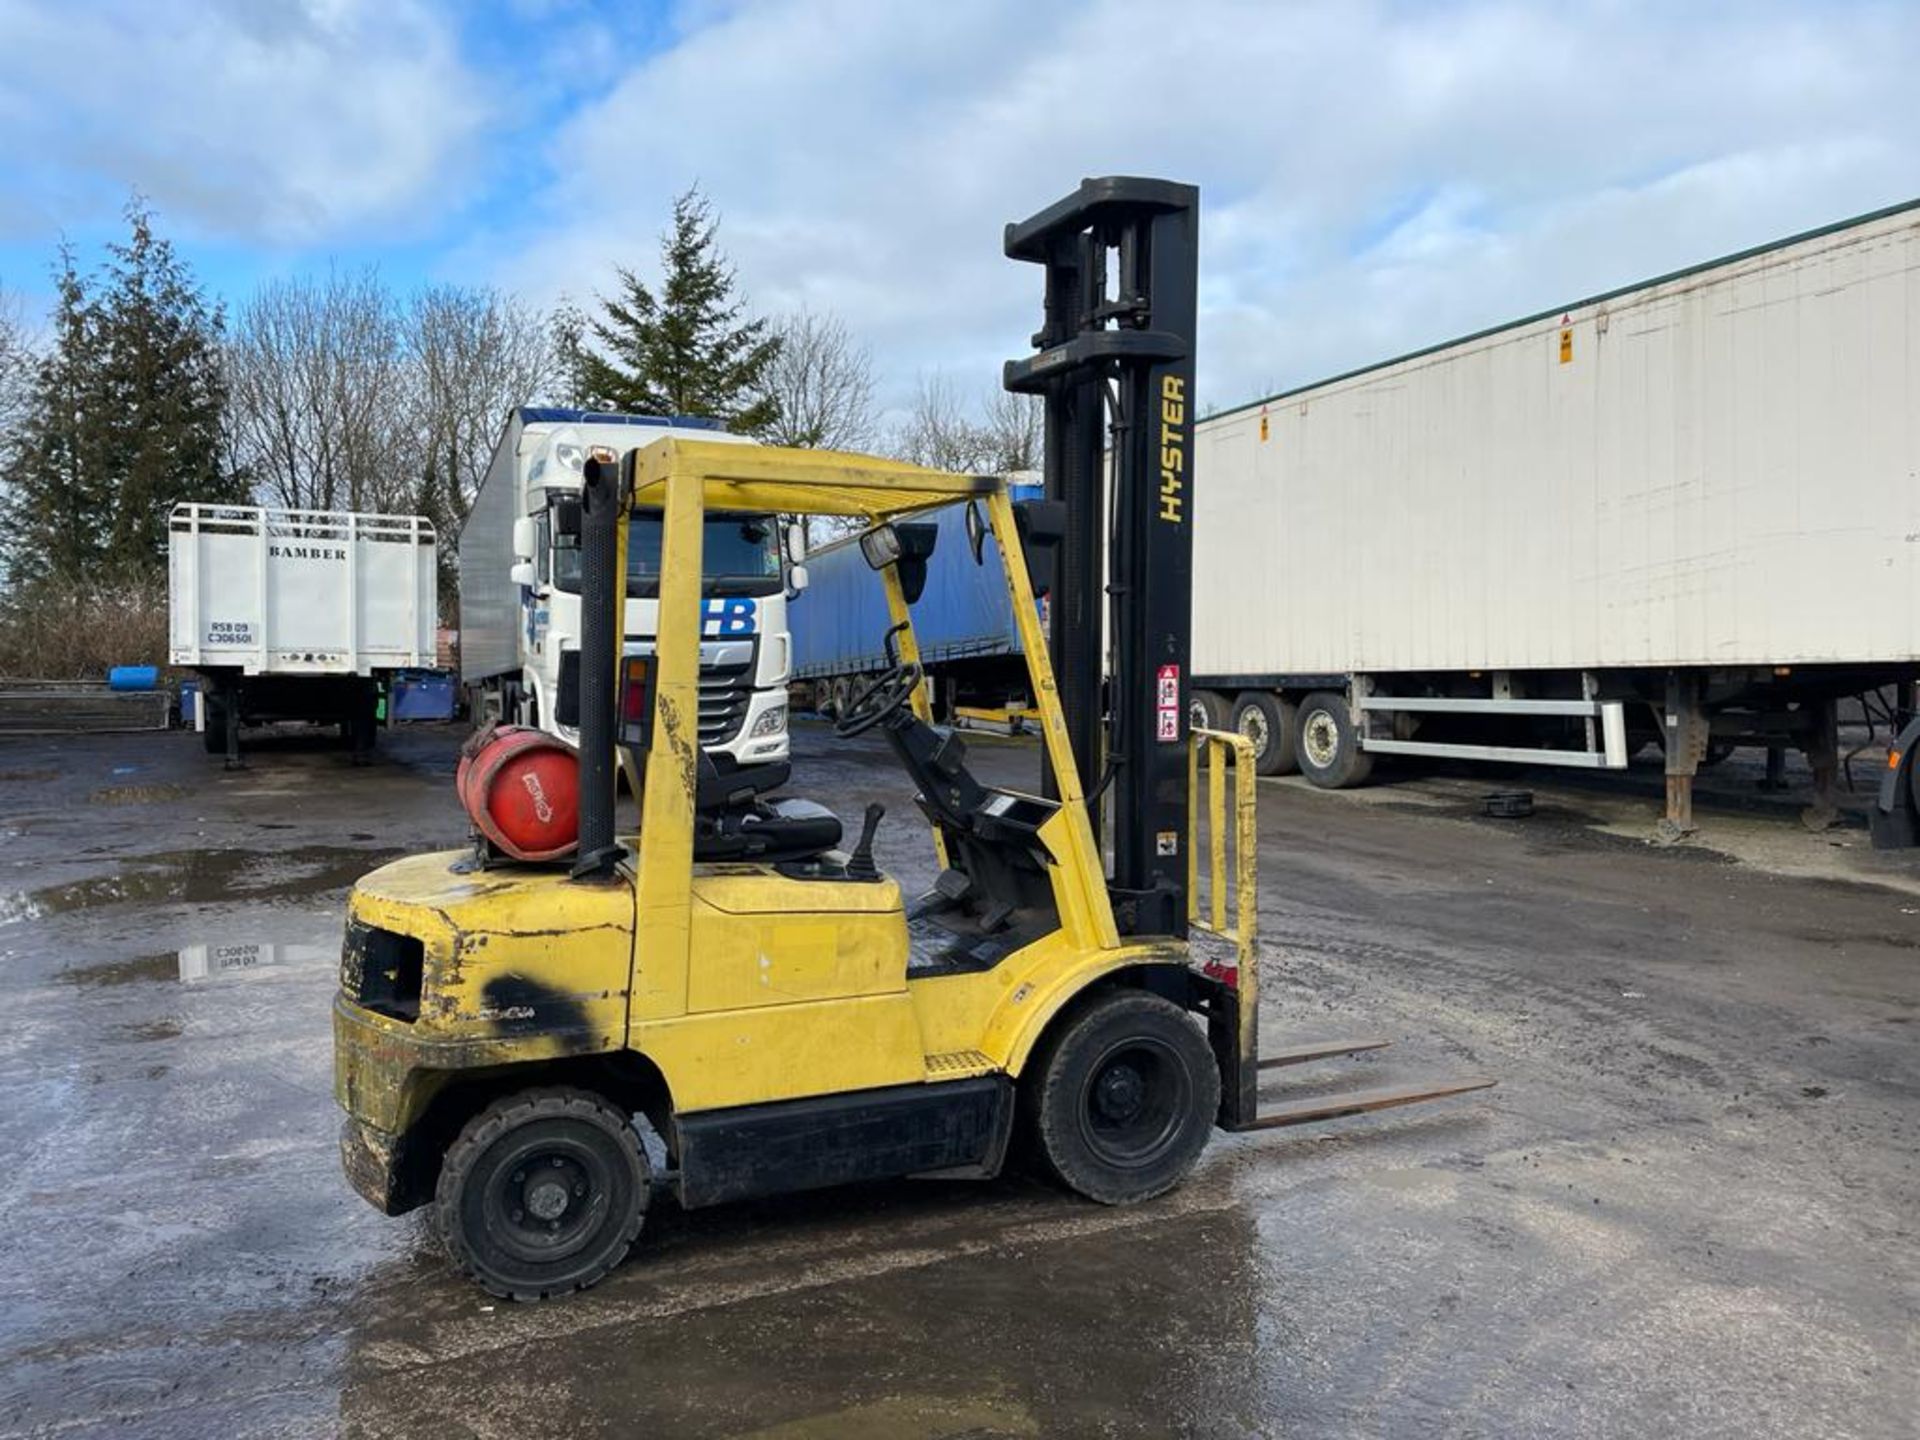 2005 Hyster 2.5 Ton Gas Forklift - Image 3 of 7